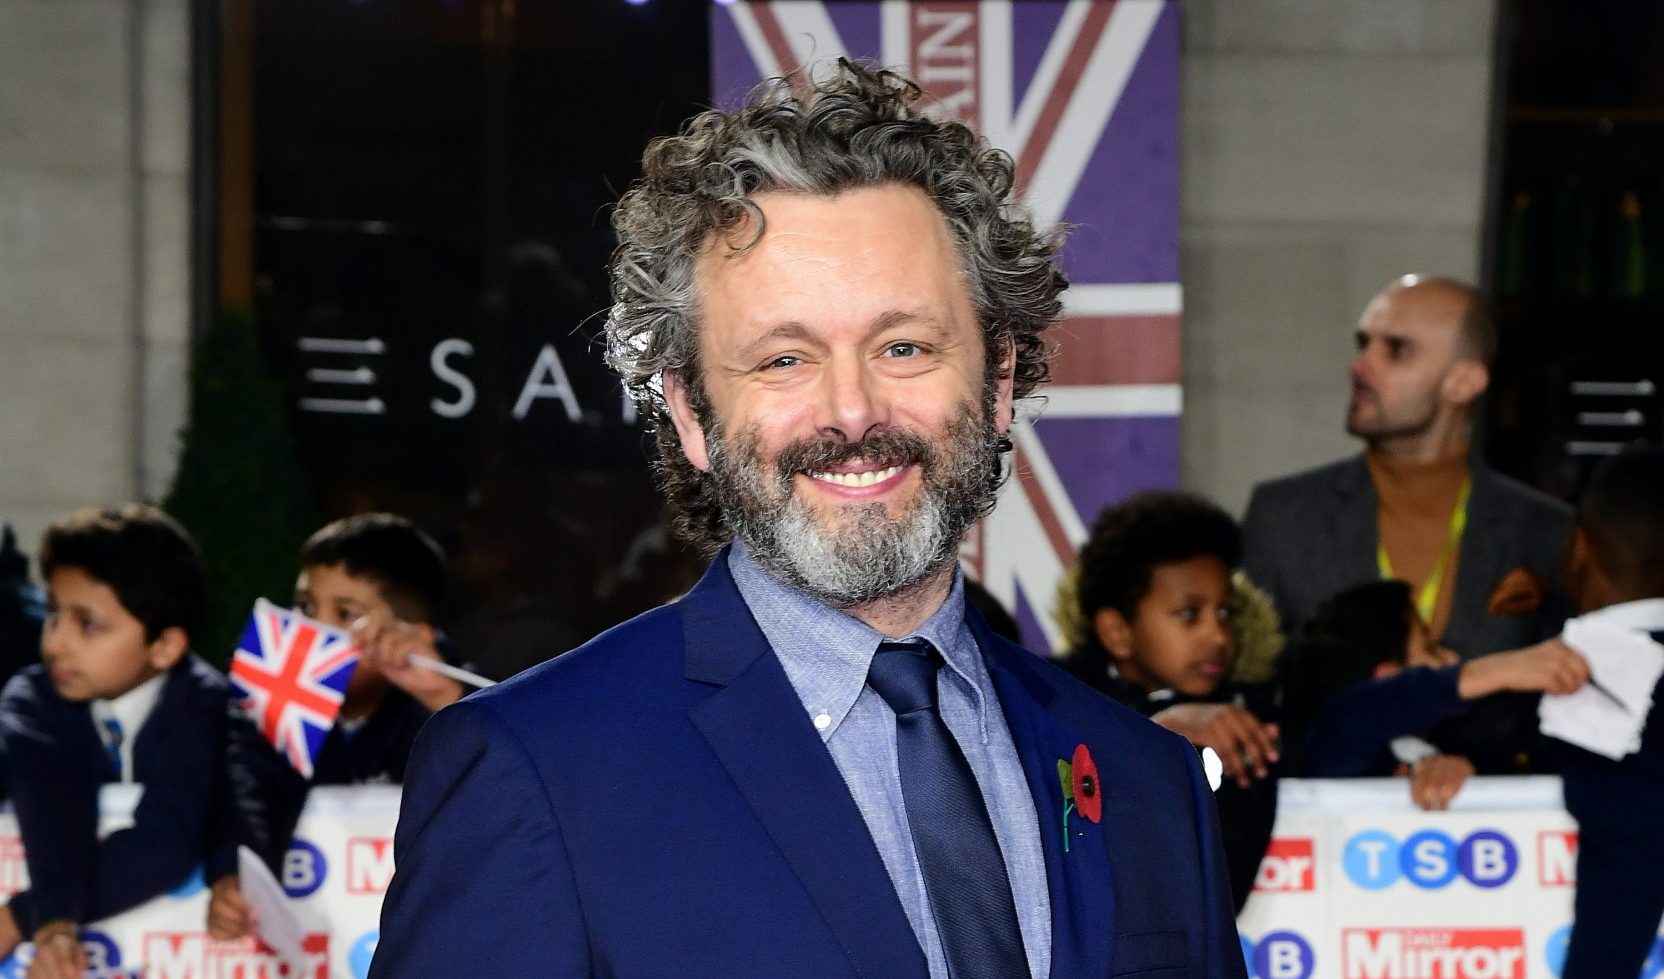 Michael Sheen returned his OBE so he could air views on the monarchy